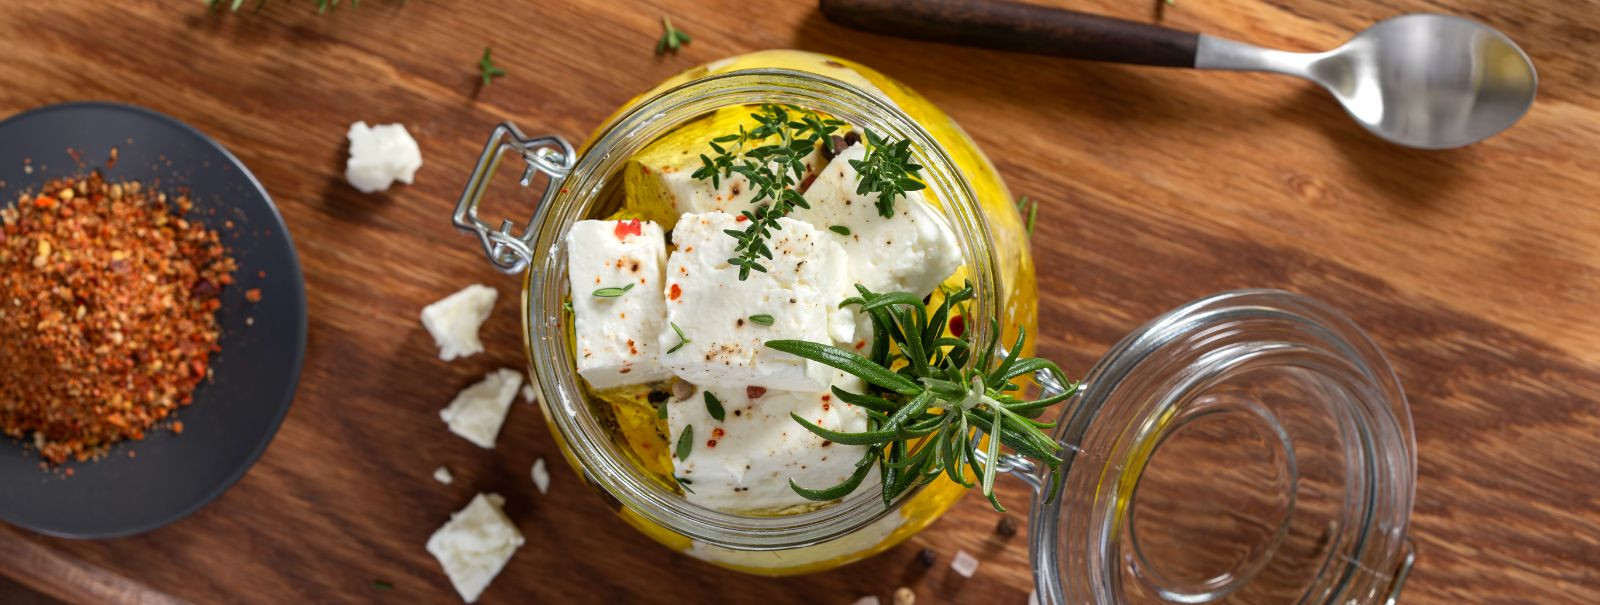 Feta Ziria is a traditional Greek cheese that stands out in the world of dairy for its rich flavor and high-quality production. Known for its crumbly texture an